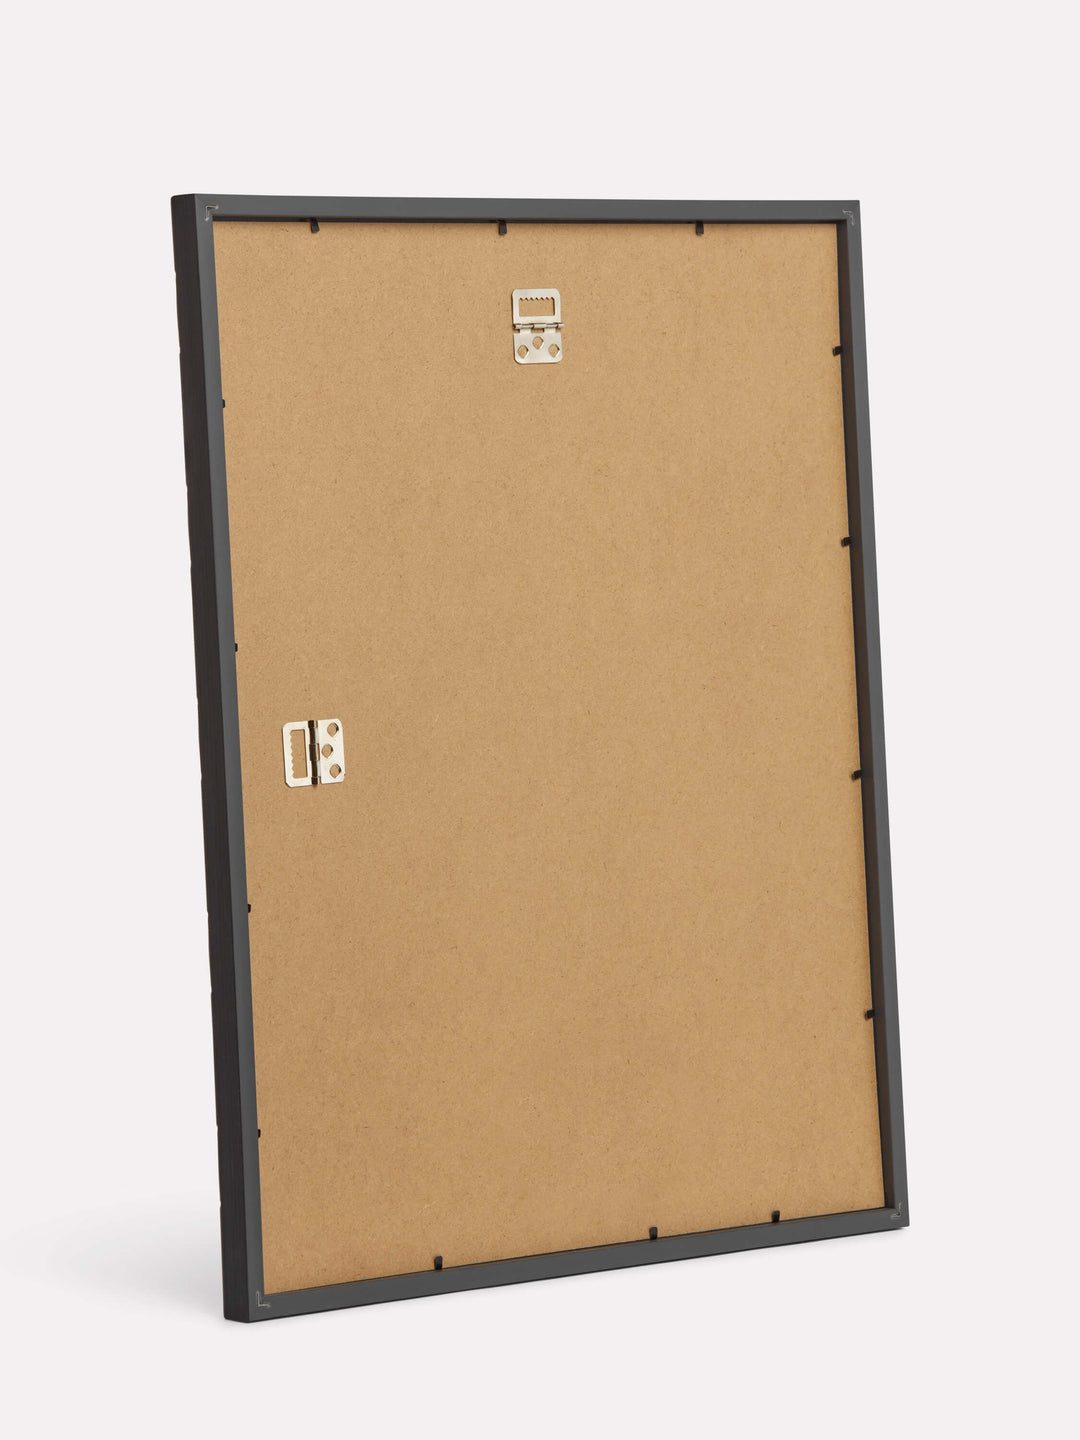 16x20-inch Bamboo Frame, Black - Back view